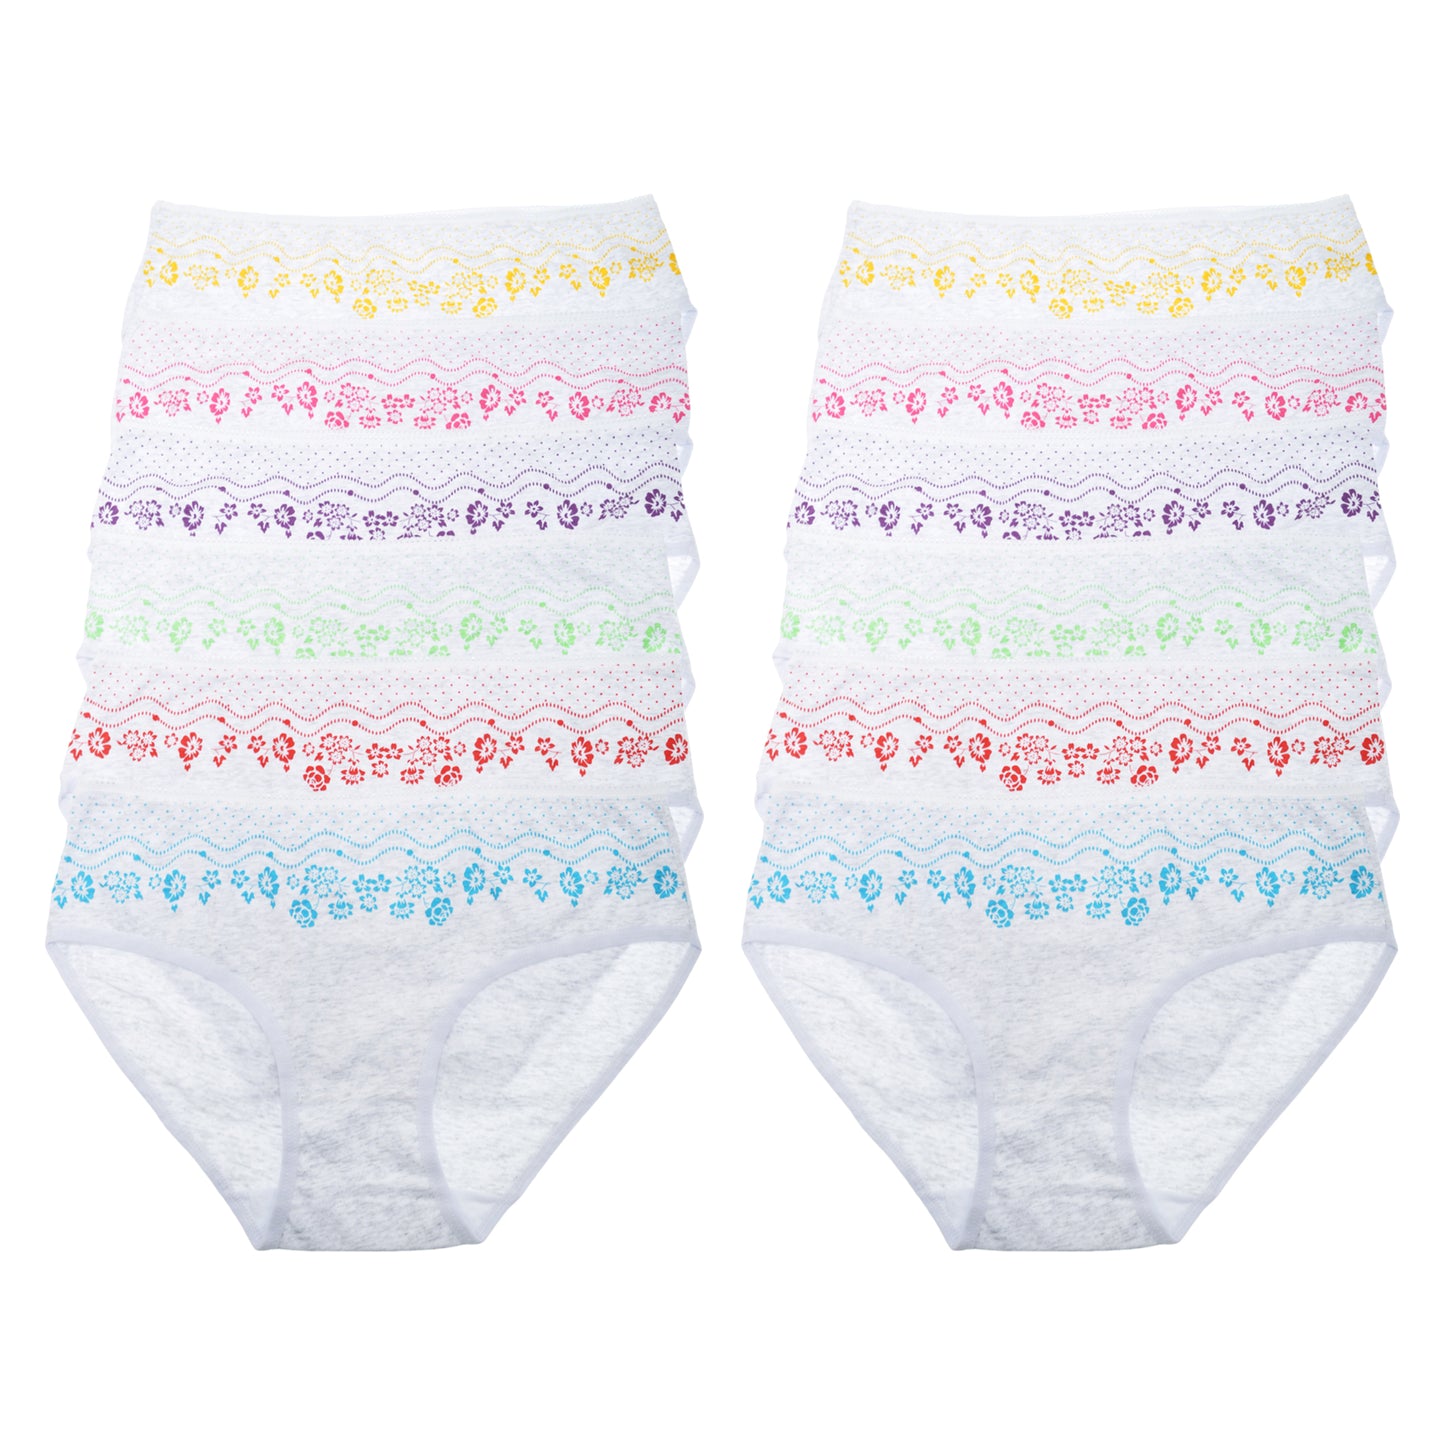 Cotton Hiphugger Panties with Flower Print Detail (12-Pack)